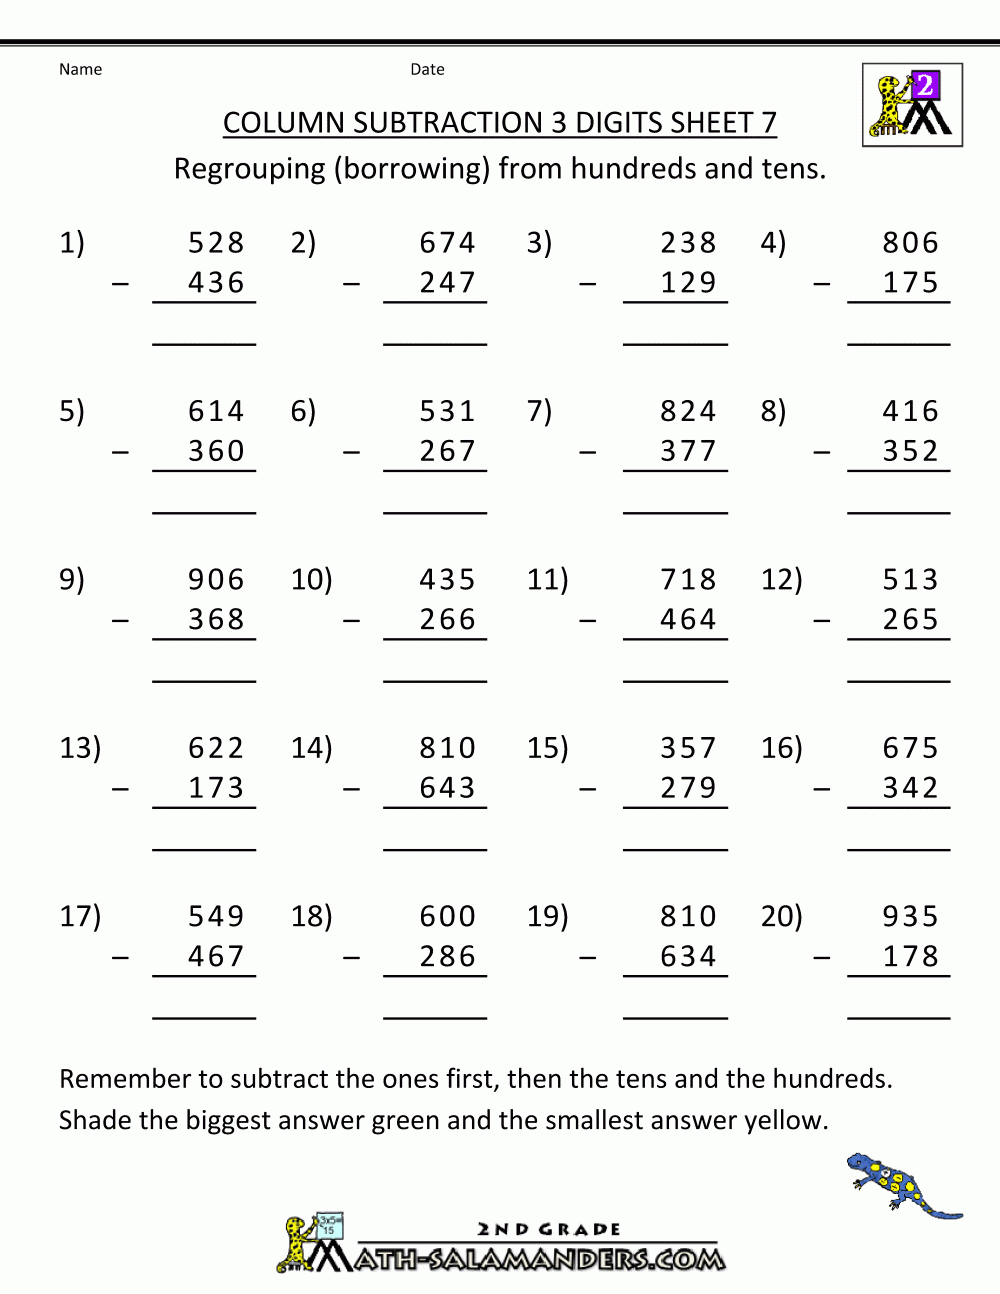 Subtraction Practice Column Subtraction 3 Digits 7 Subtraction With Regrouping Worksheets Math Worksheets Free Printable Math Worksheets